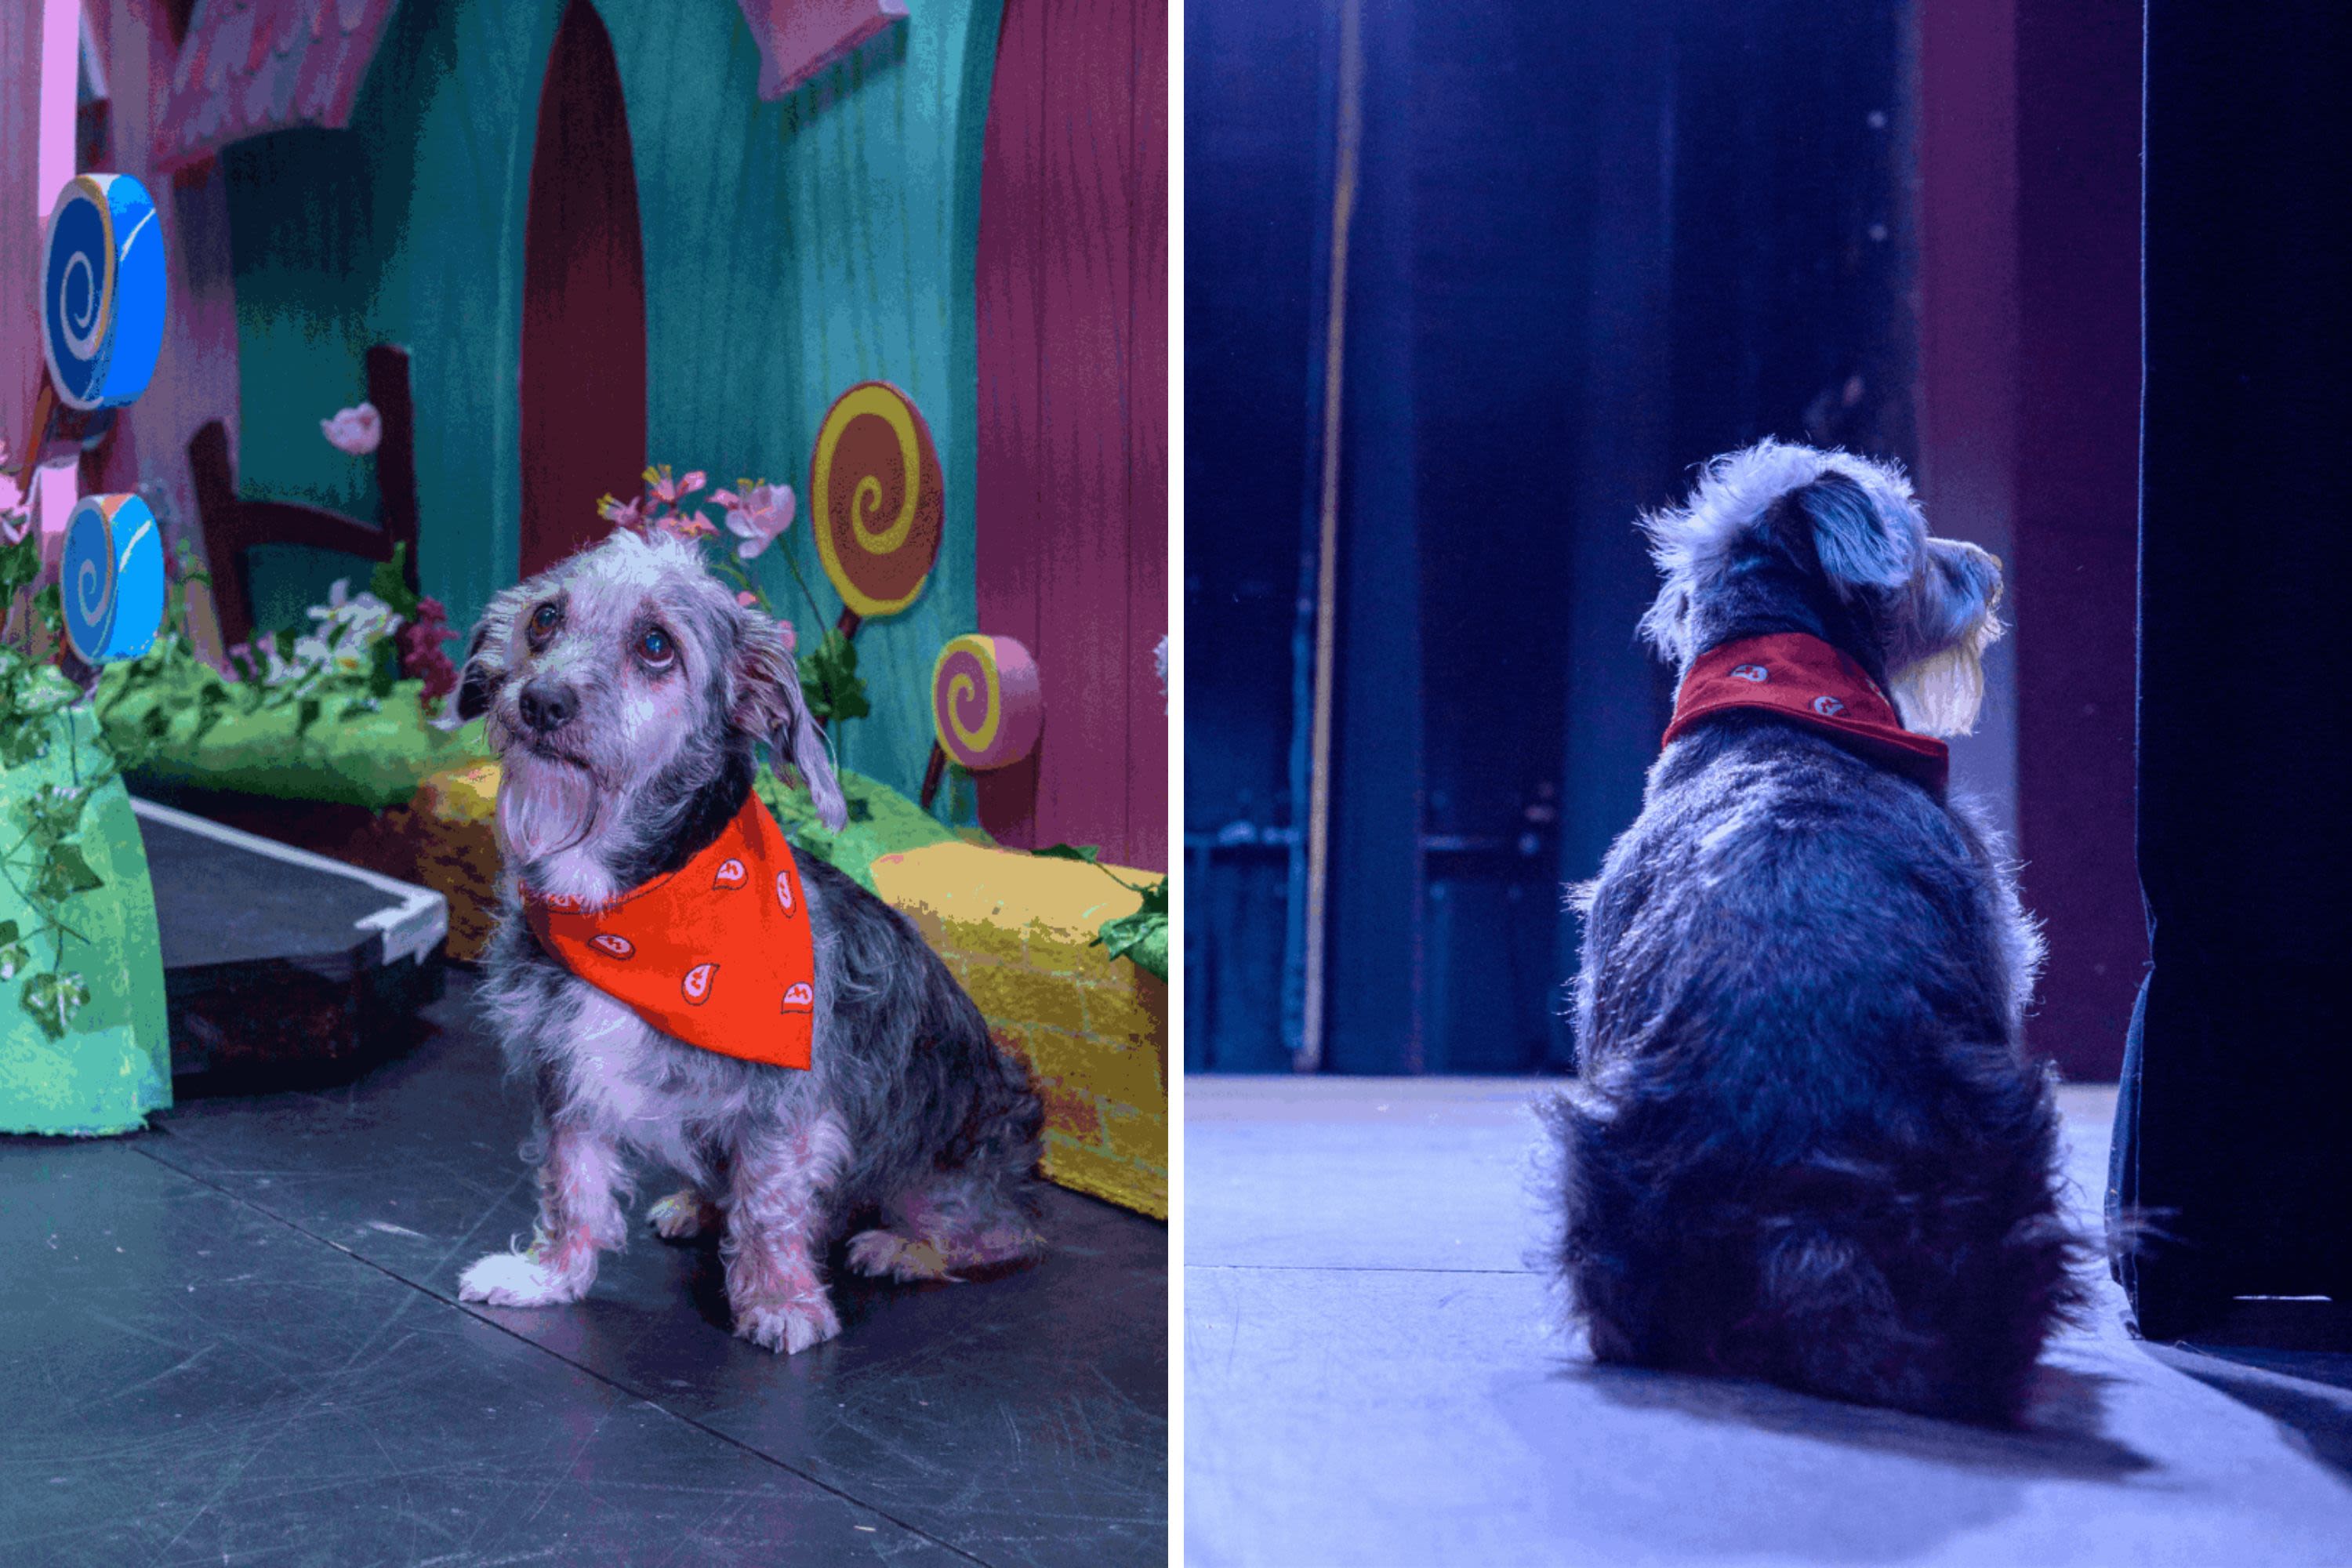 12-year-old rescue dog goes from "cage to stage" as he makes acting debut